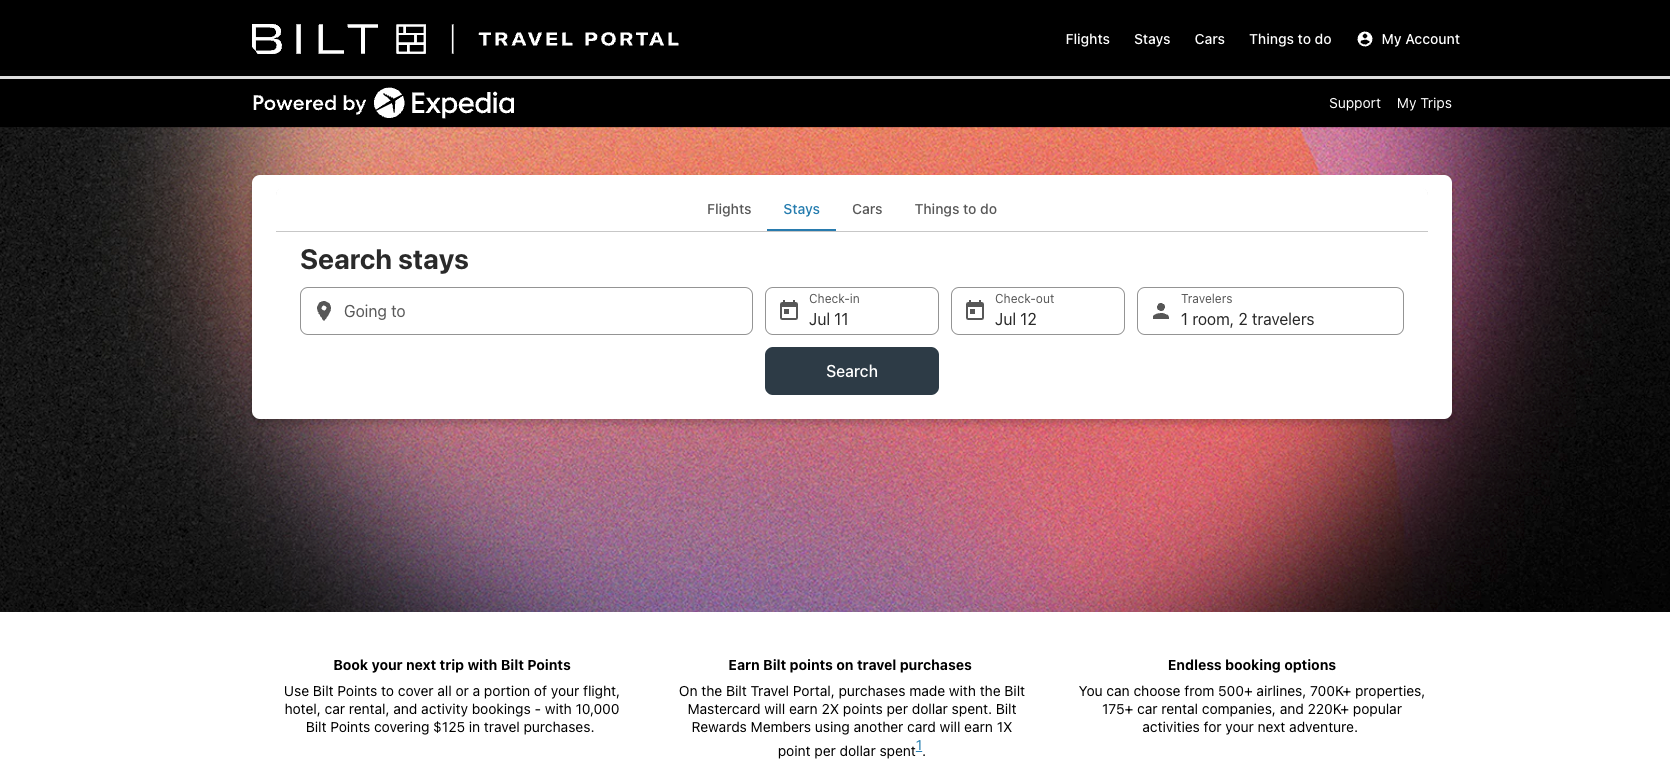 Bilt Rewards launches a travel portal for members The Points Guy